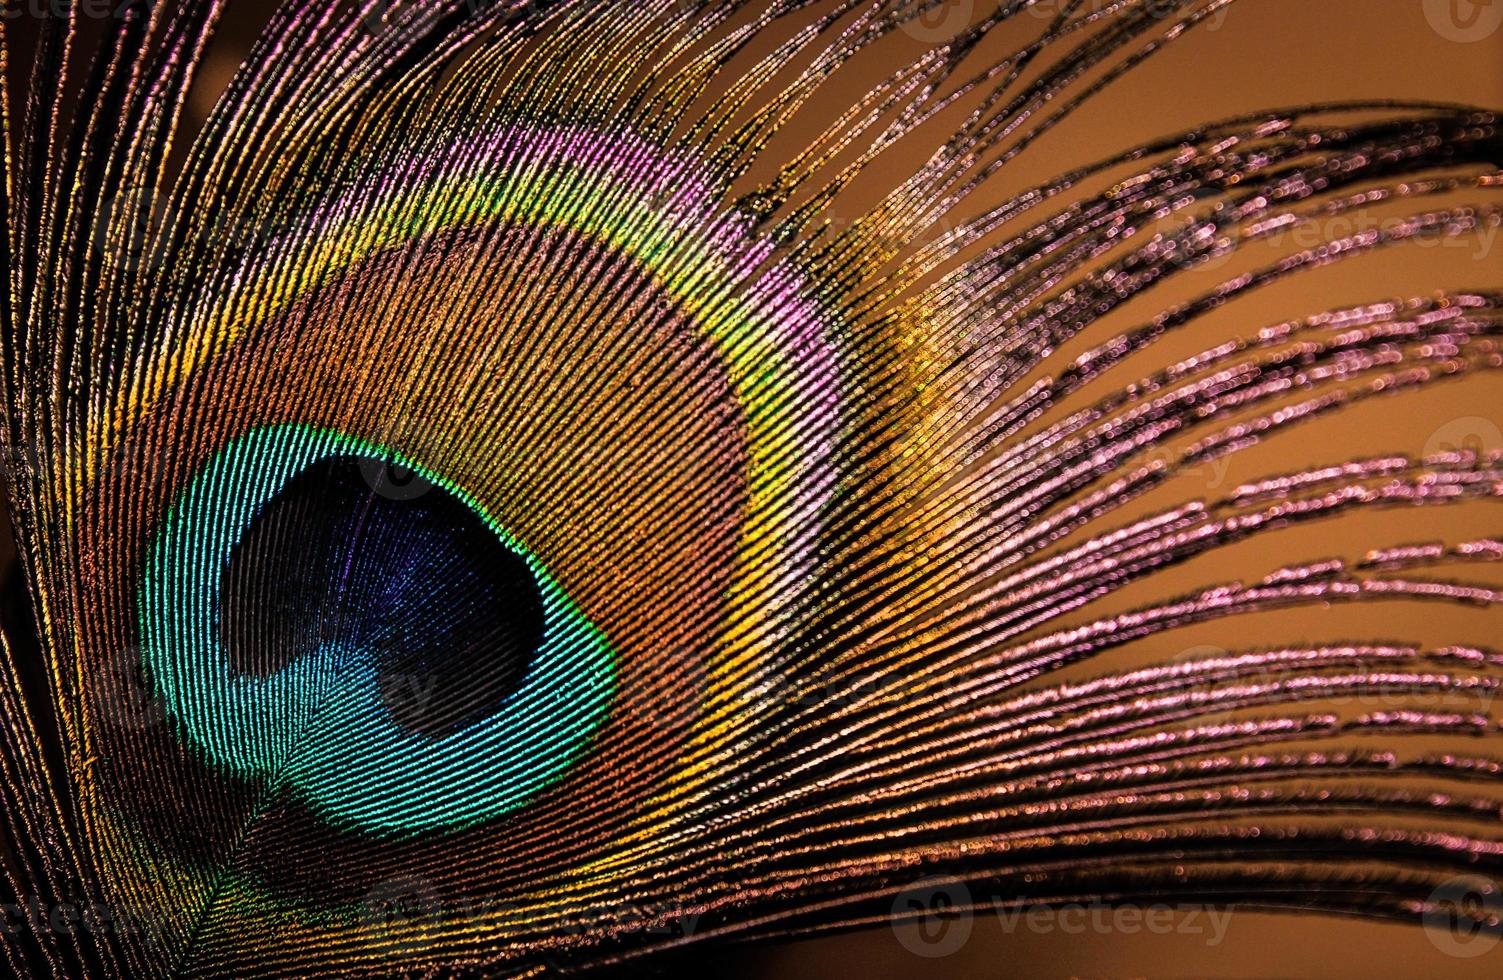 Peacock Feather photo